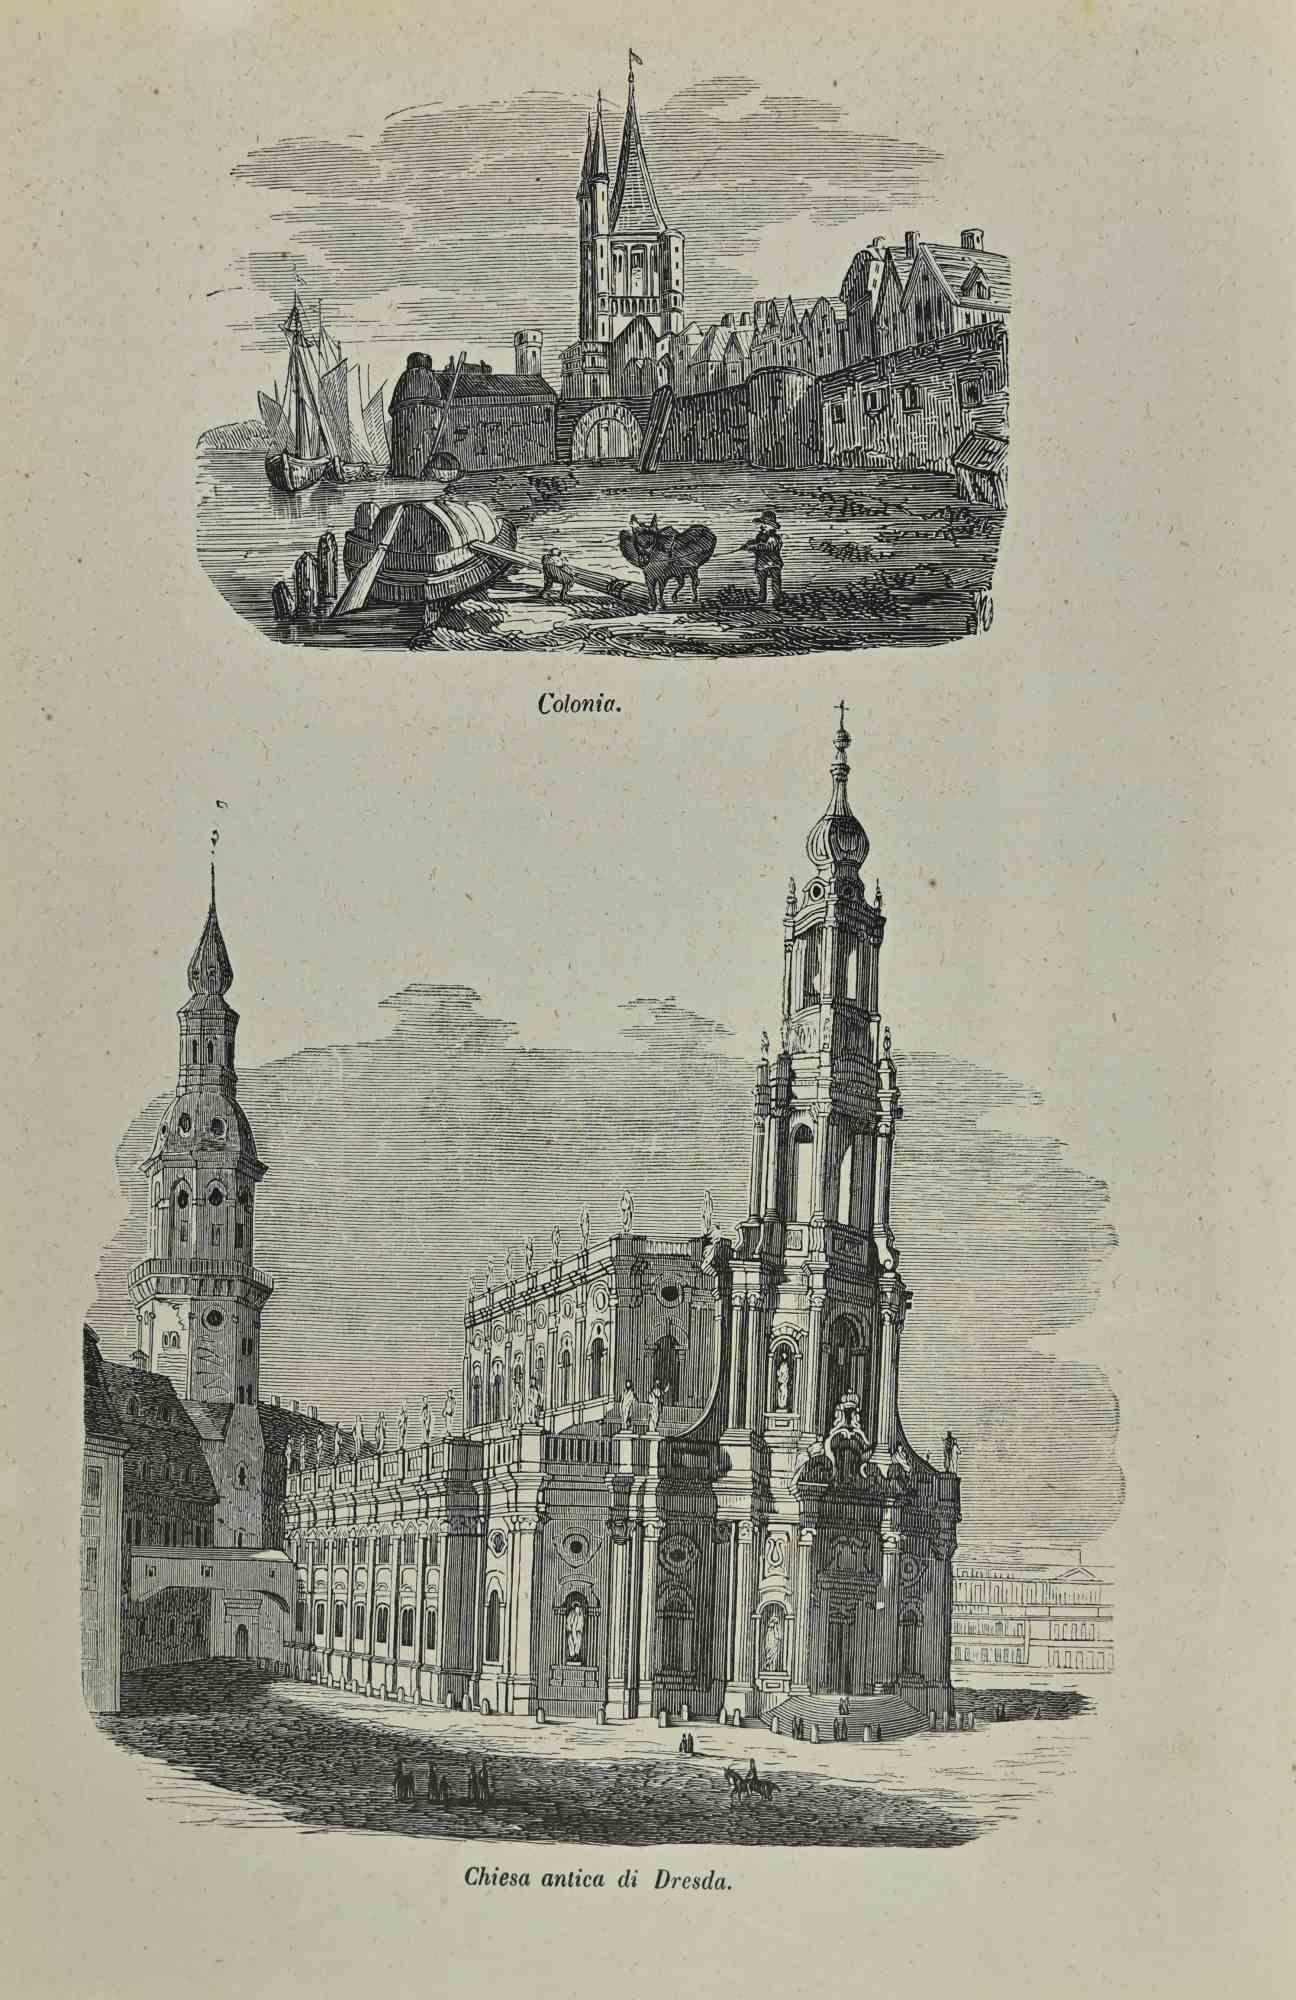 Cologne and Old Church of Dresden is a lithograph made by Auguste Wahlen in 1844.

Good condition.

Drawing in black and white.

Below the drawings are the respective original titles "Colonia" and "Chiesa antica di Dresda".

The work is part of